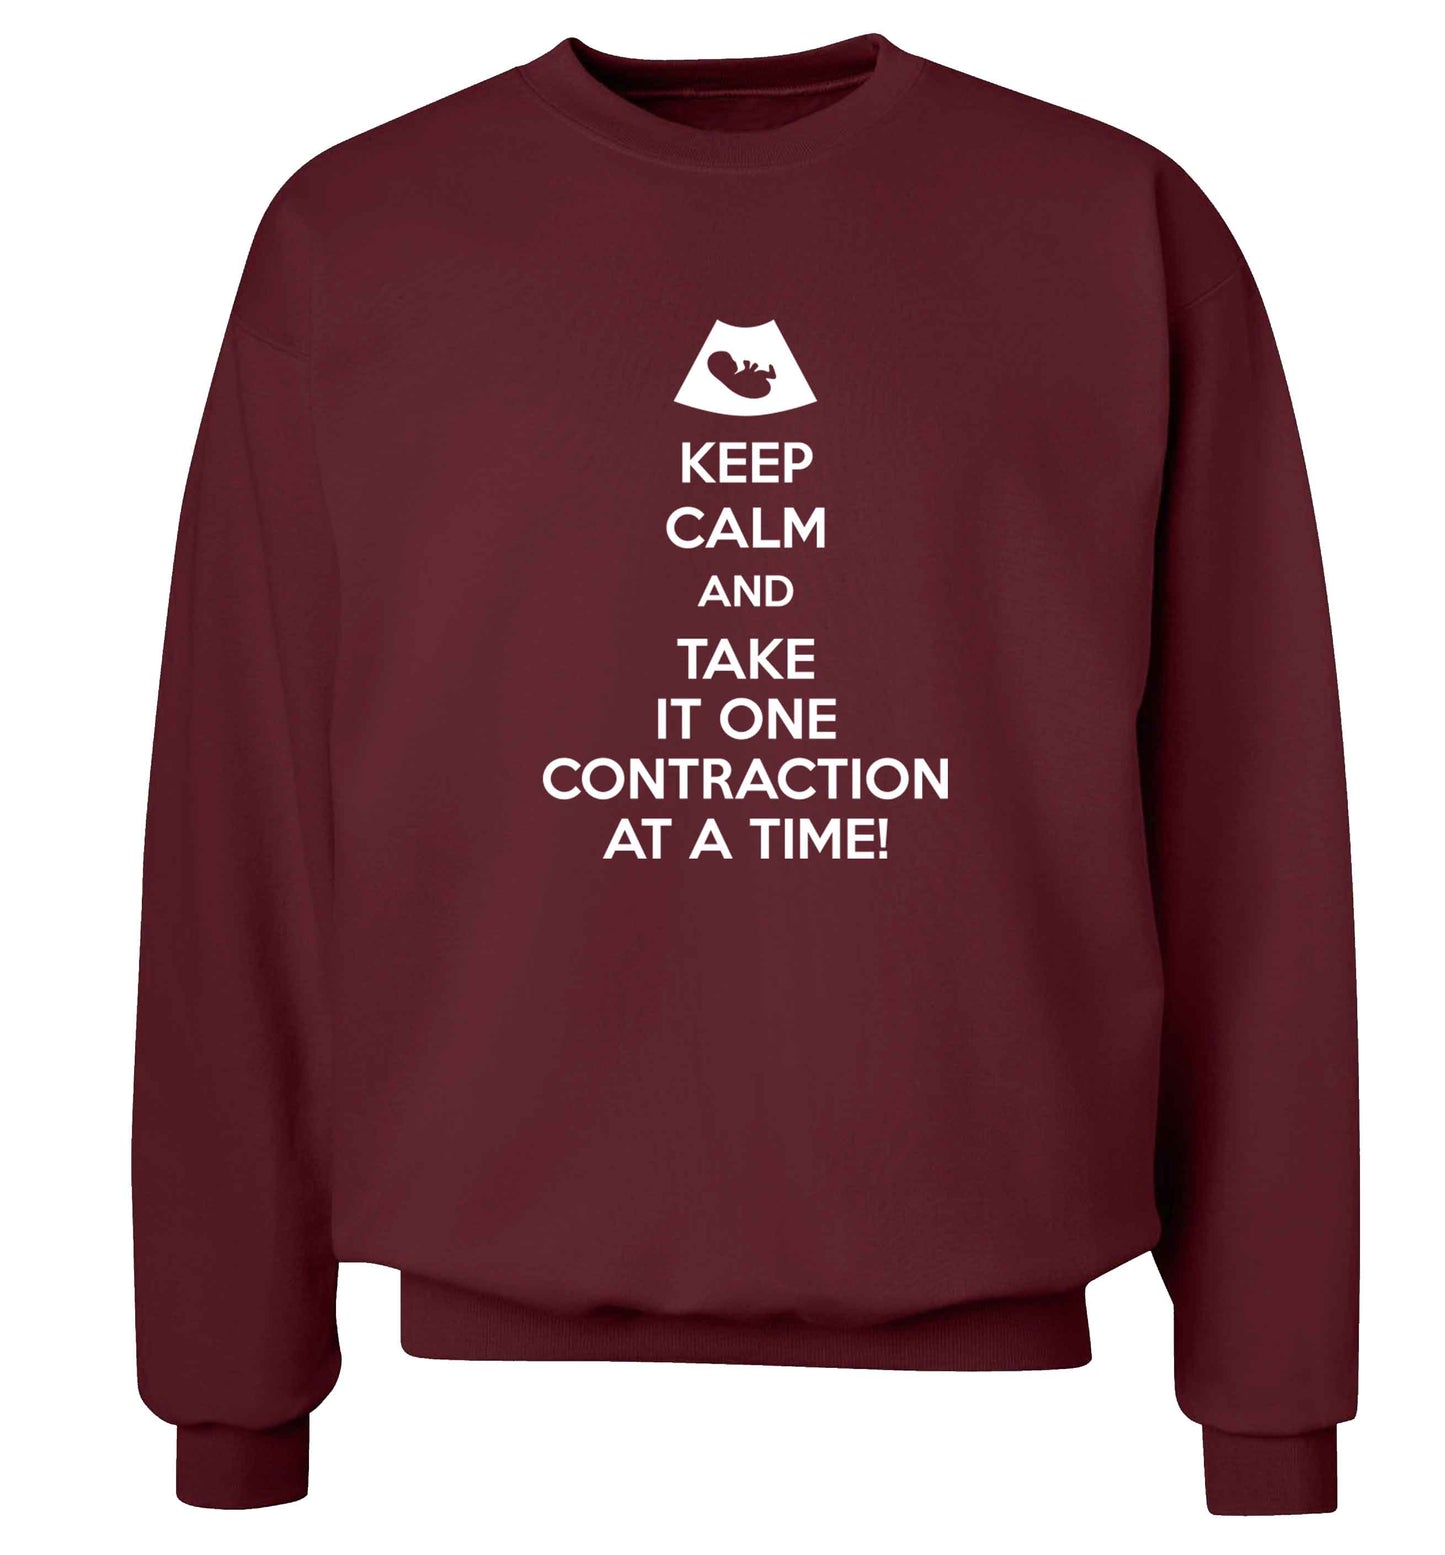 Keep calm and take it one contraction at a time Adult's unisex maroon Sweater 2XL